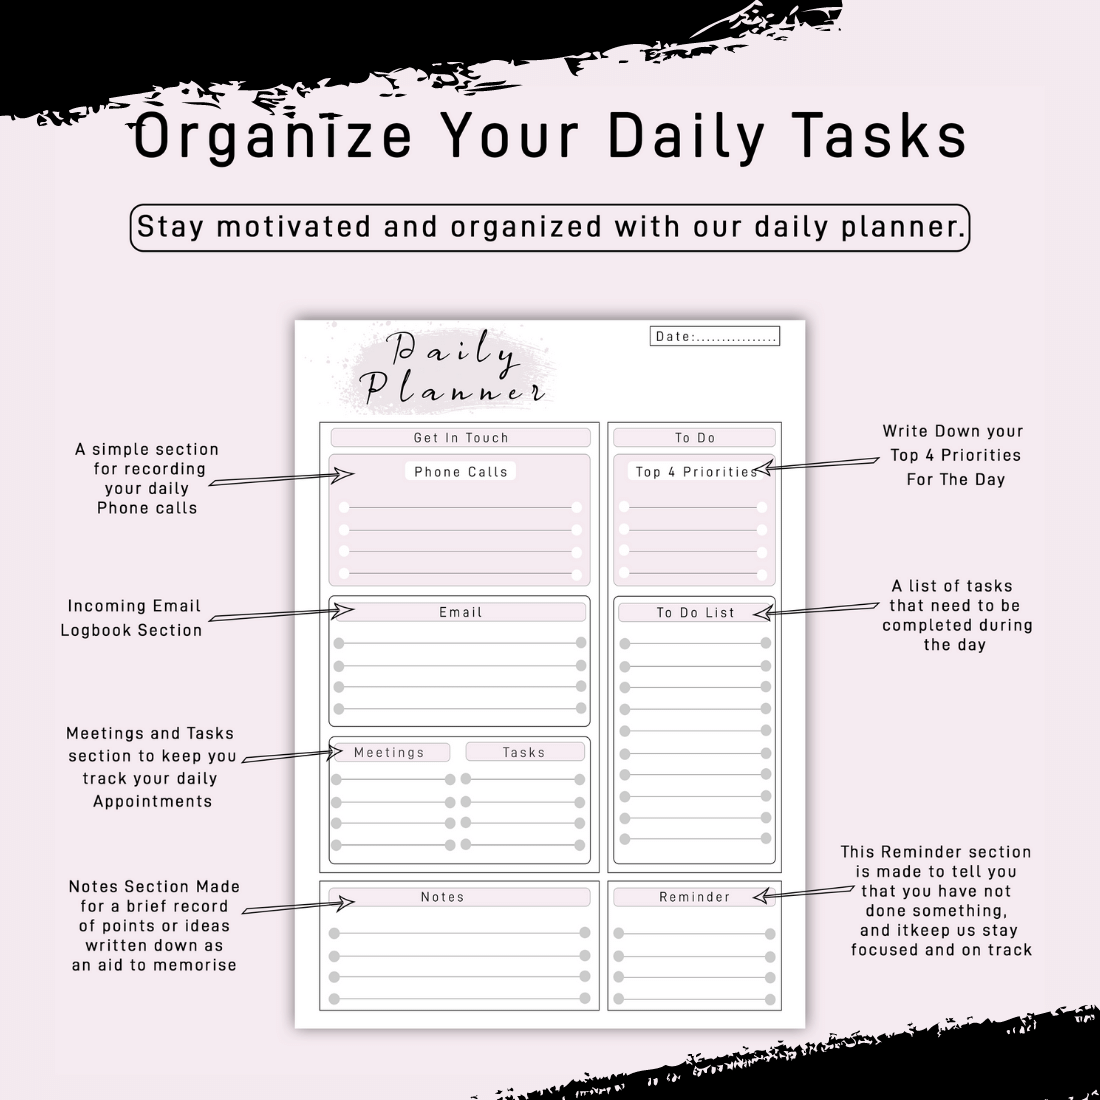 Organize your daily tasks properly.